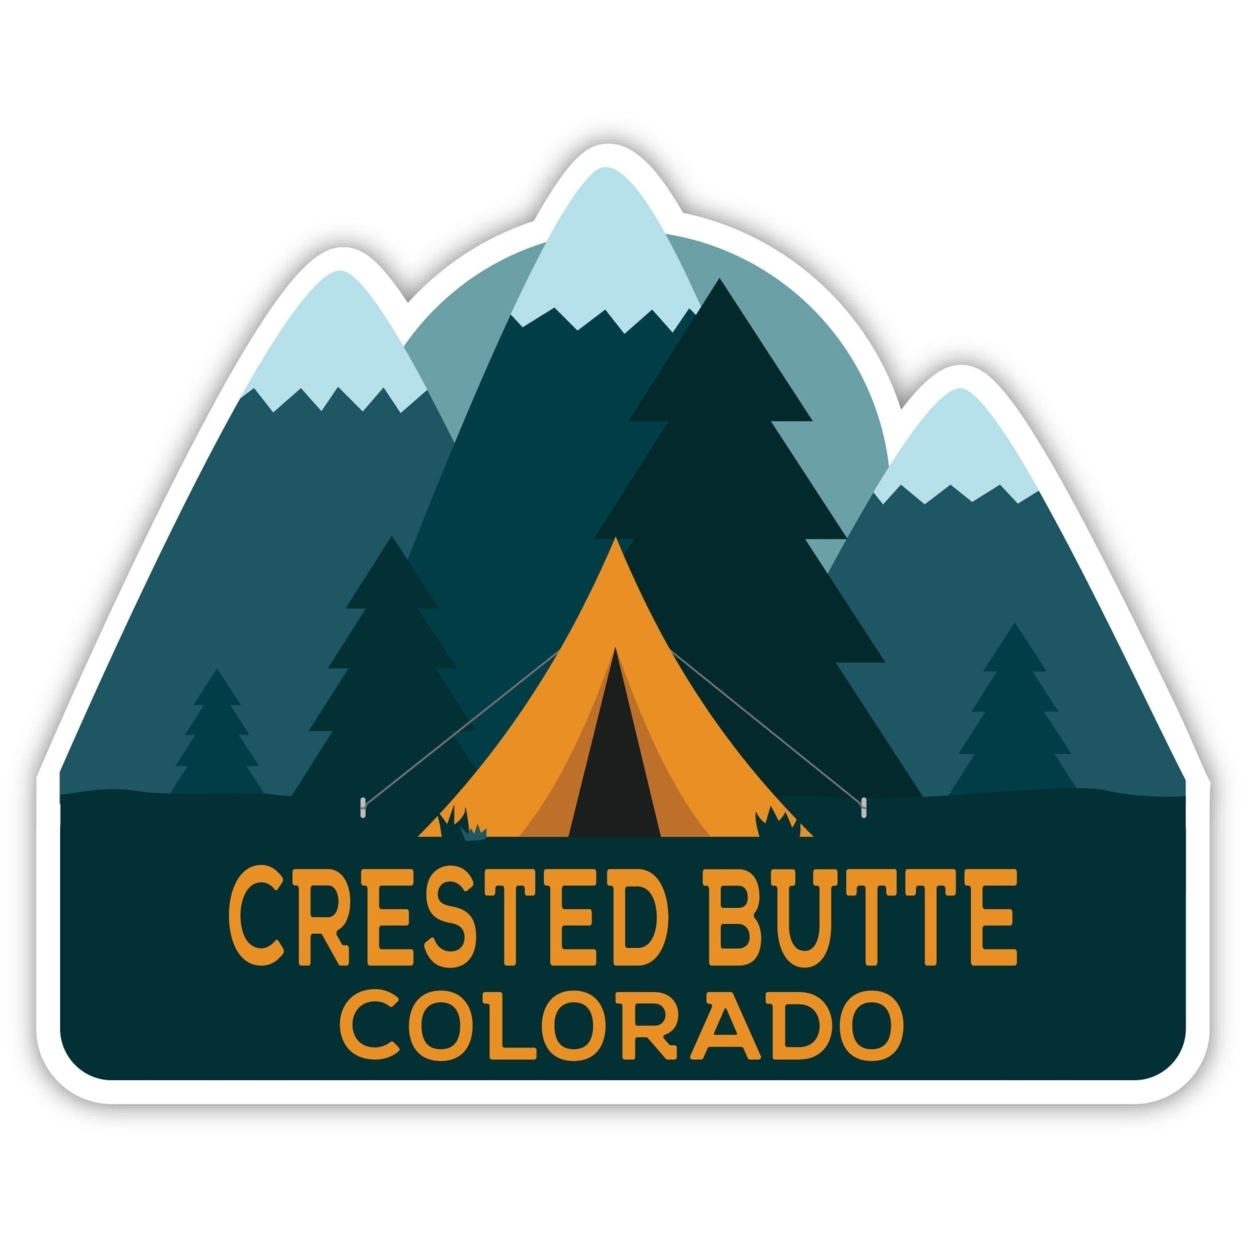 Crested Butte Colorado Souvenir Decorative Stickers (Choose Theme And Size) - 4-Pack, 6-Inch, Adventures Awaits